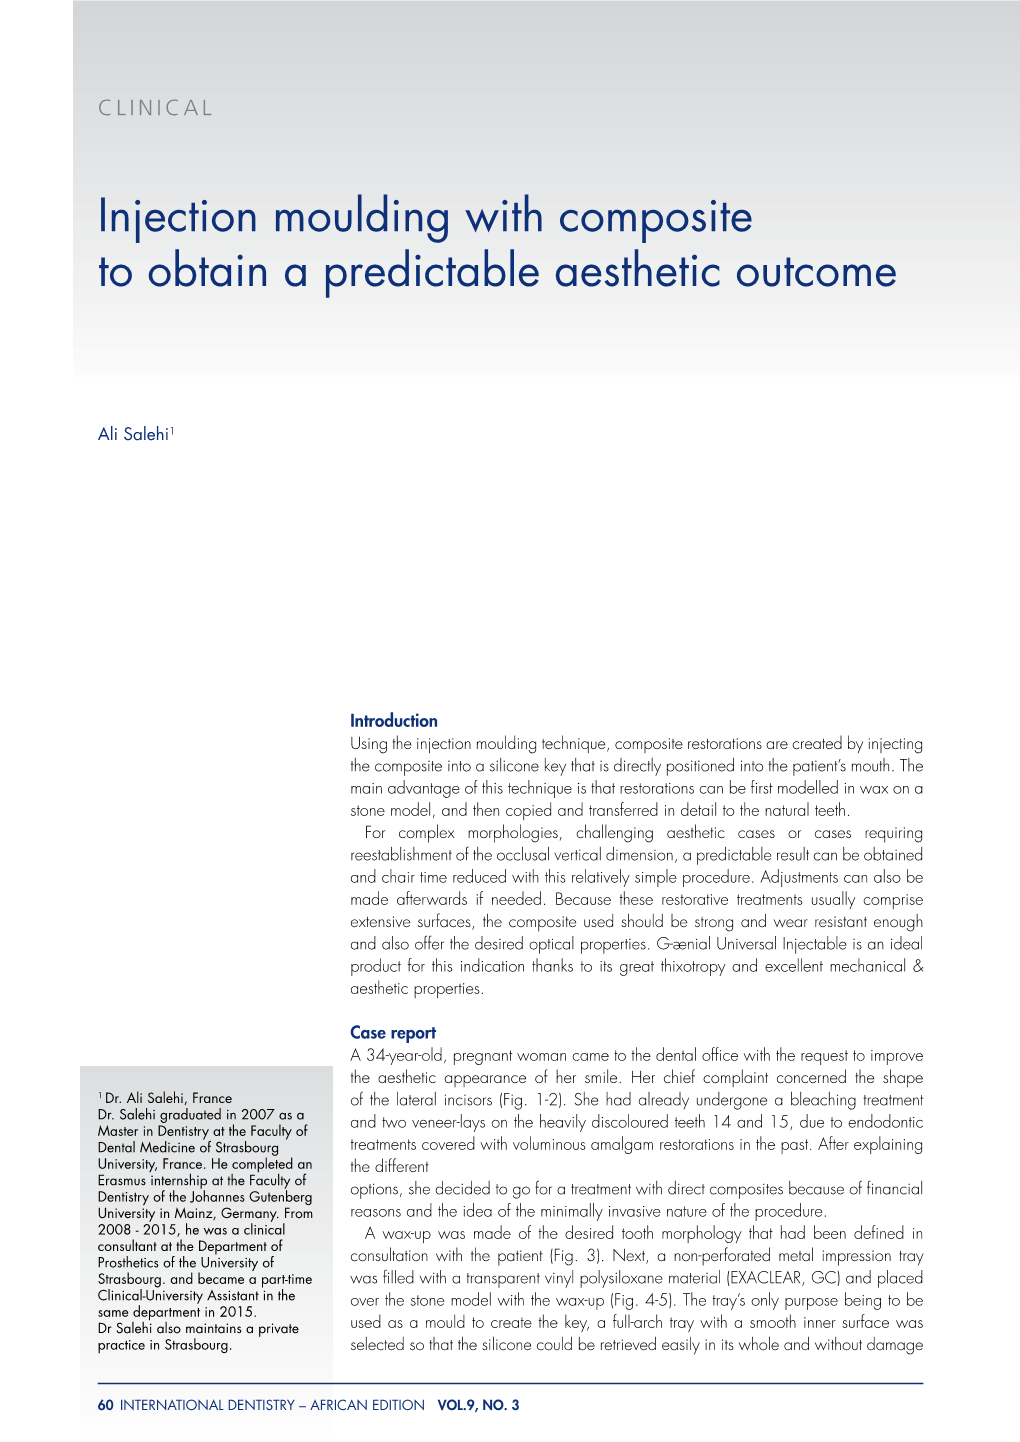 Injection Moulding with Composite to Obtain a Predictable Aesthetic Outcome